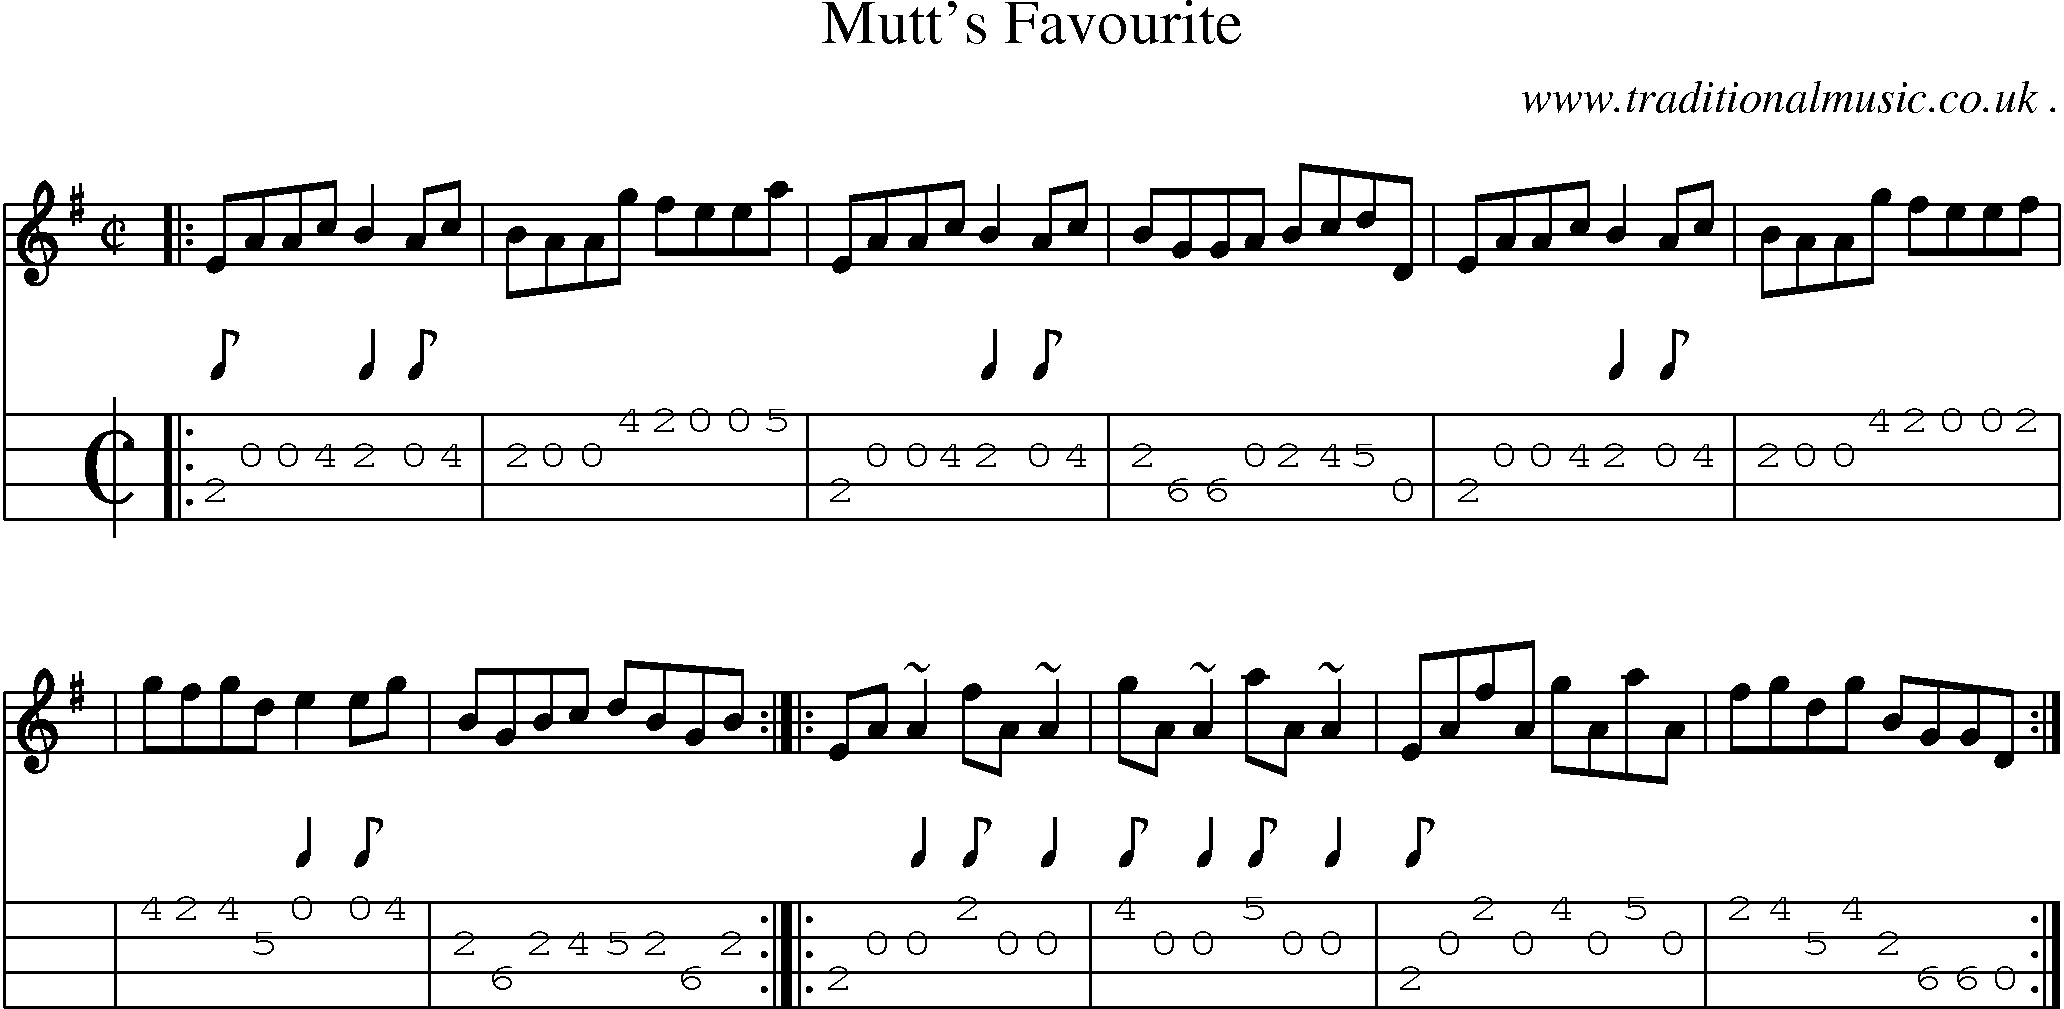 Sheet-music  score, Chords and Mandolin Tabs for Mutts Favourite